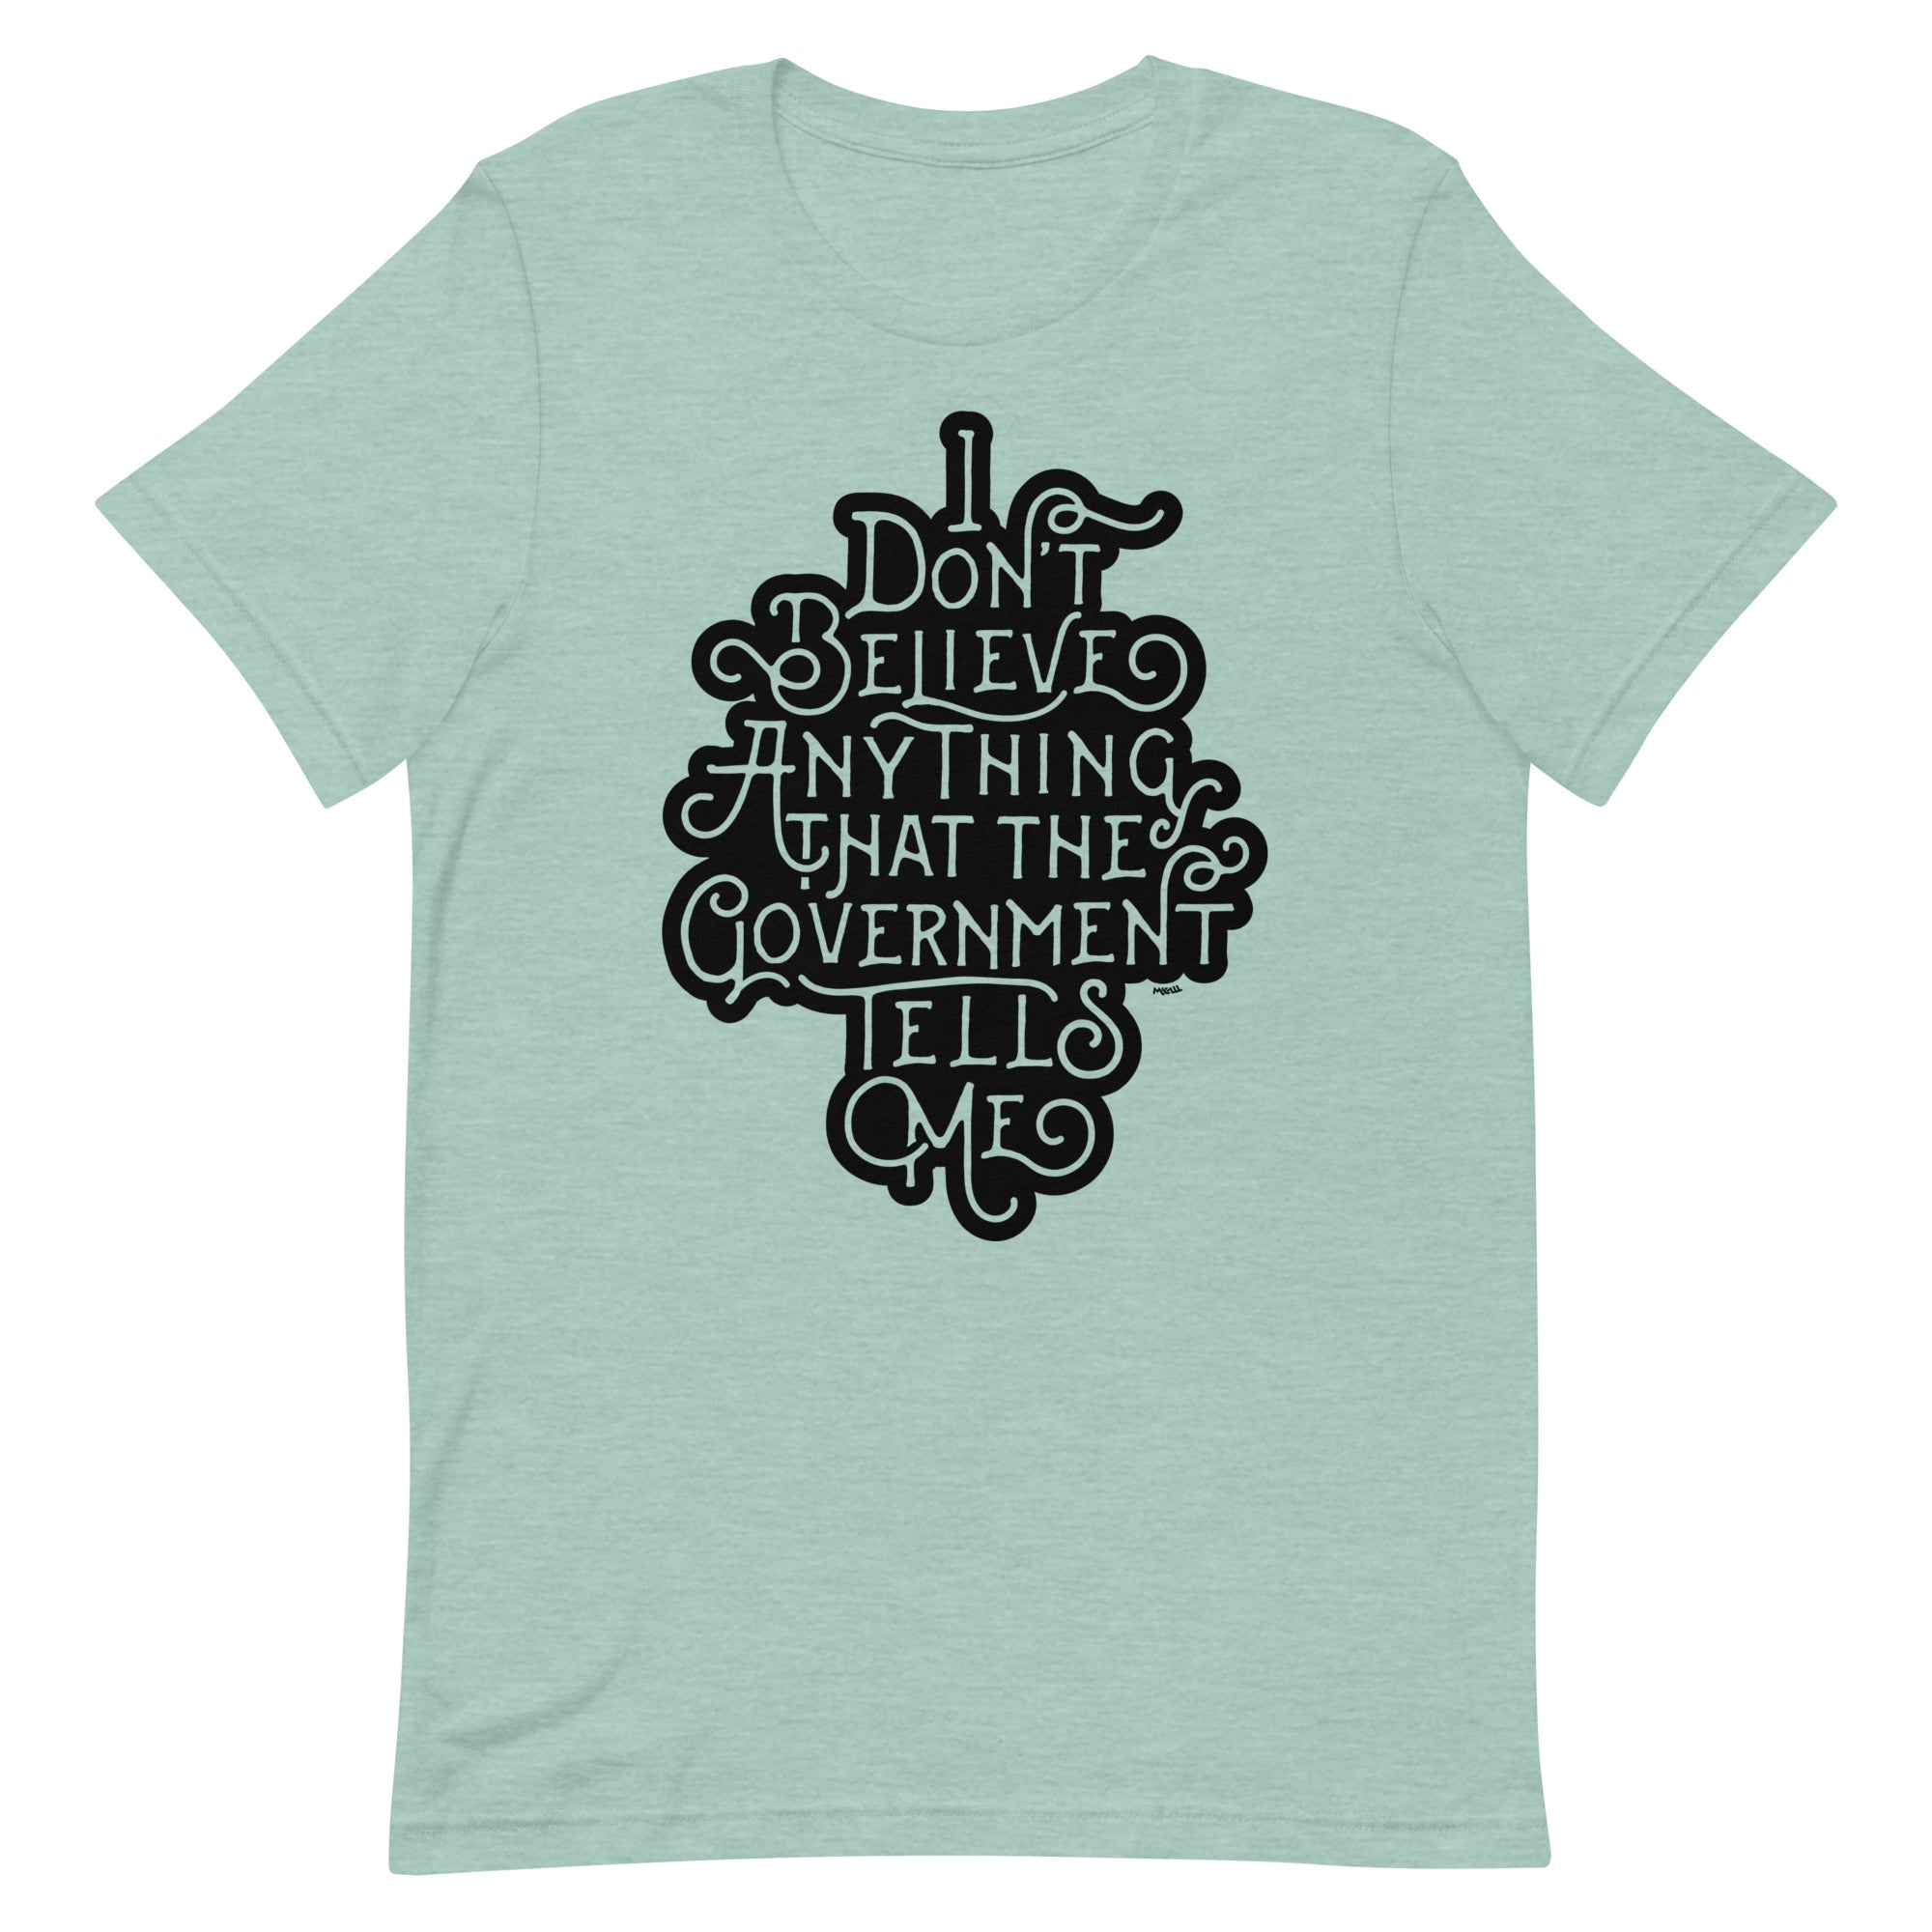 I Don't Believe Anything That the Government Tells Me Graphic T-Shirt